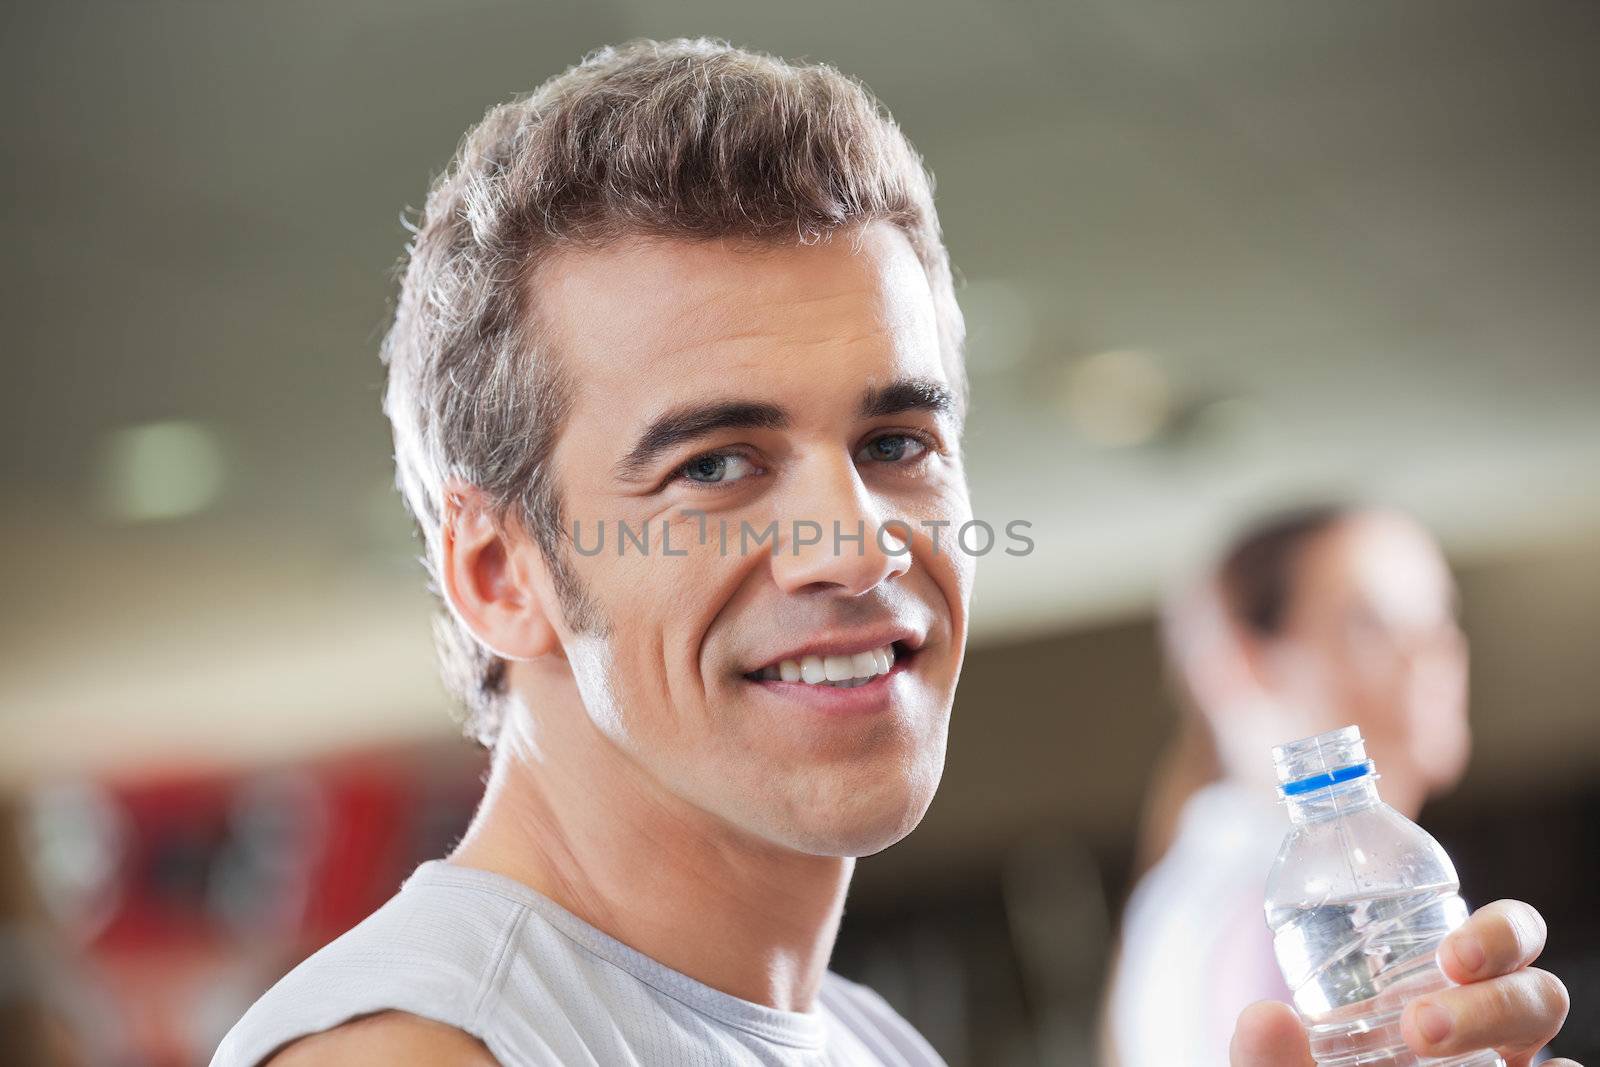 Man Holding Water Bottle In Health Club by leaf